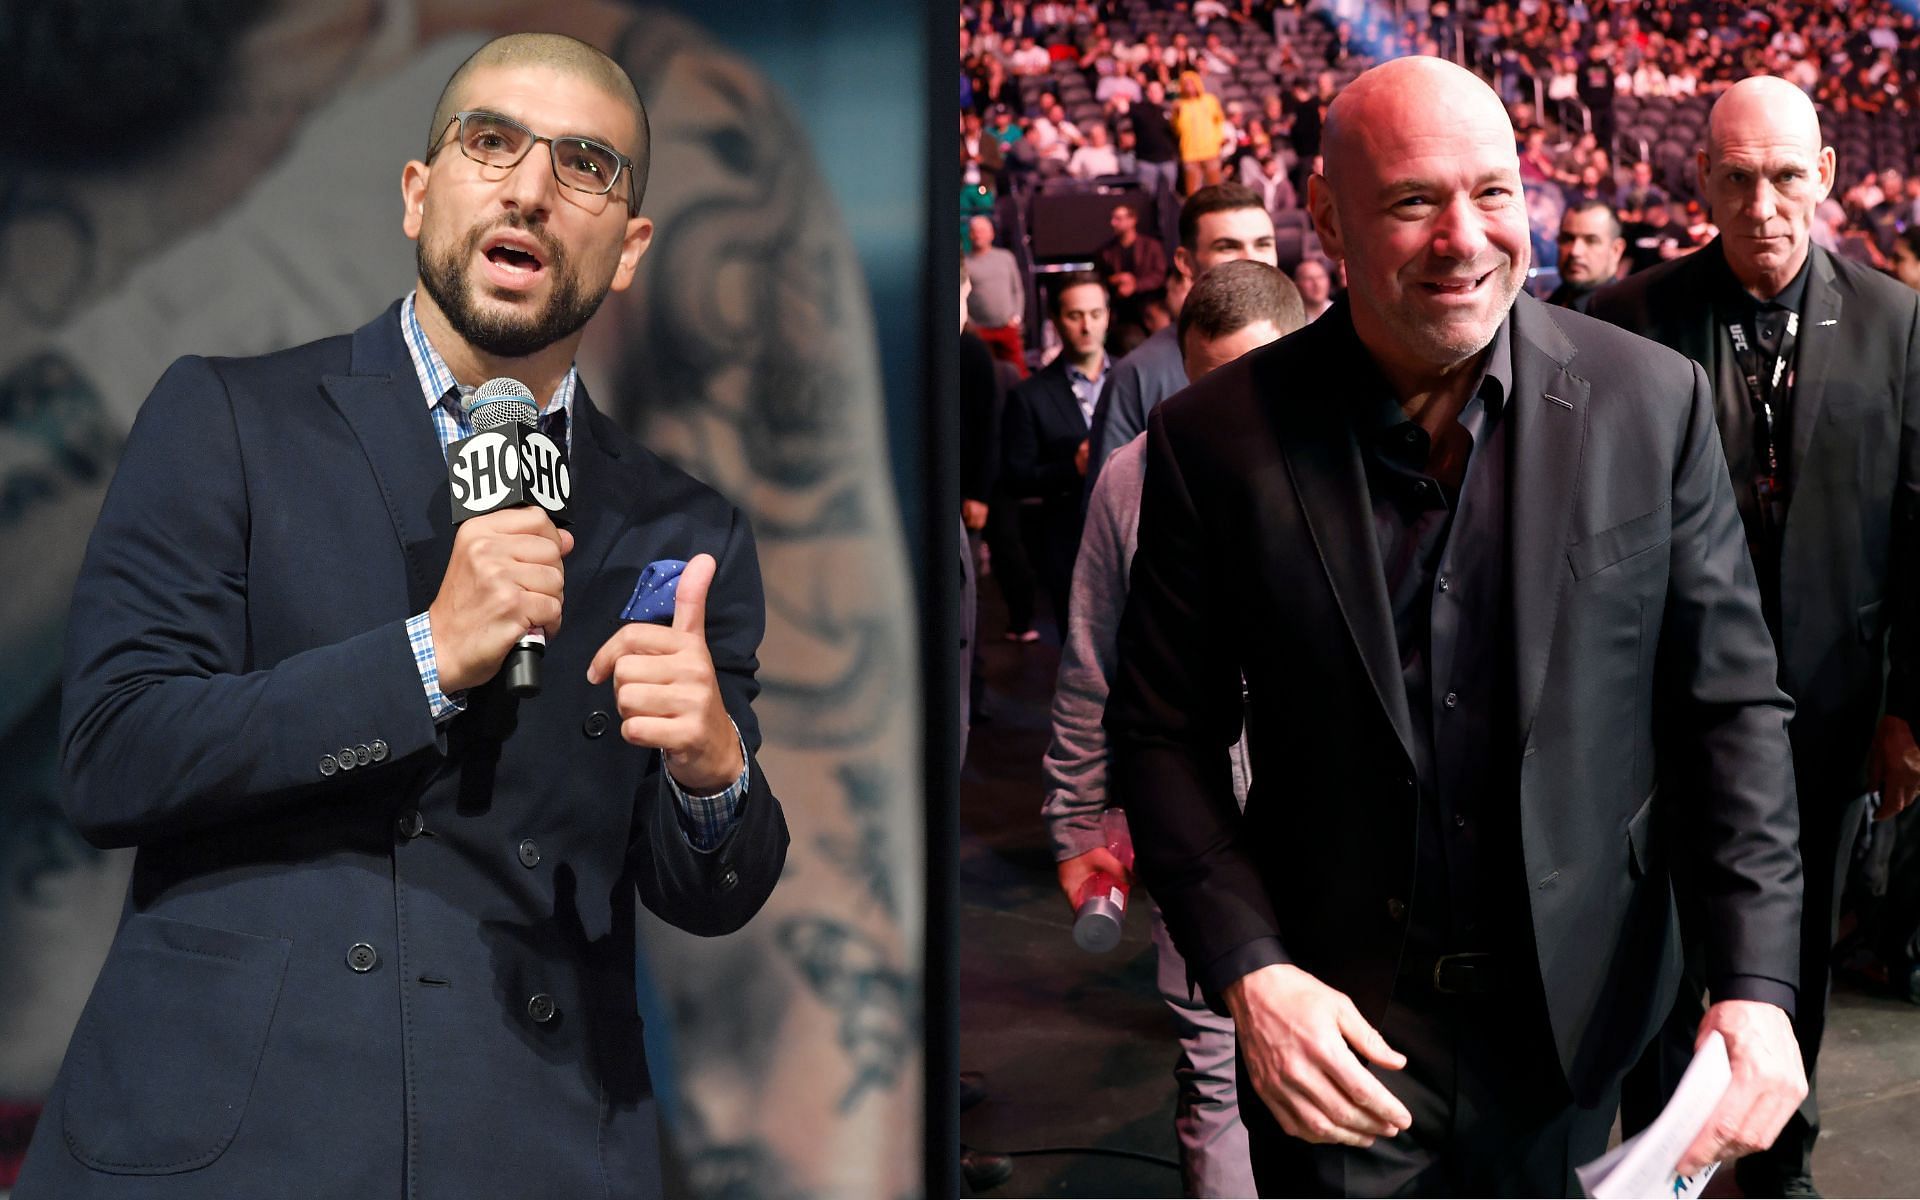 Ariel Helwani (left) and Dana White (right) (Image credits Getty Images)